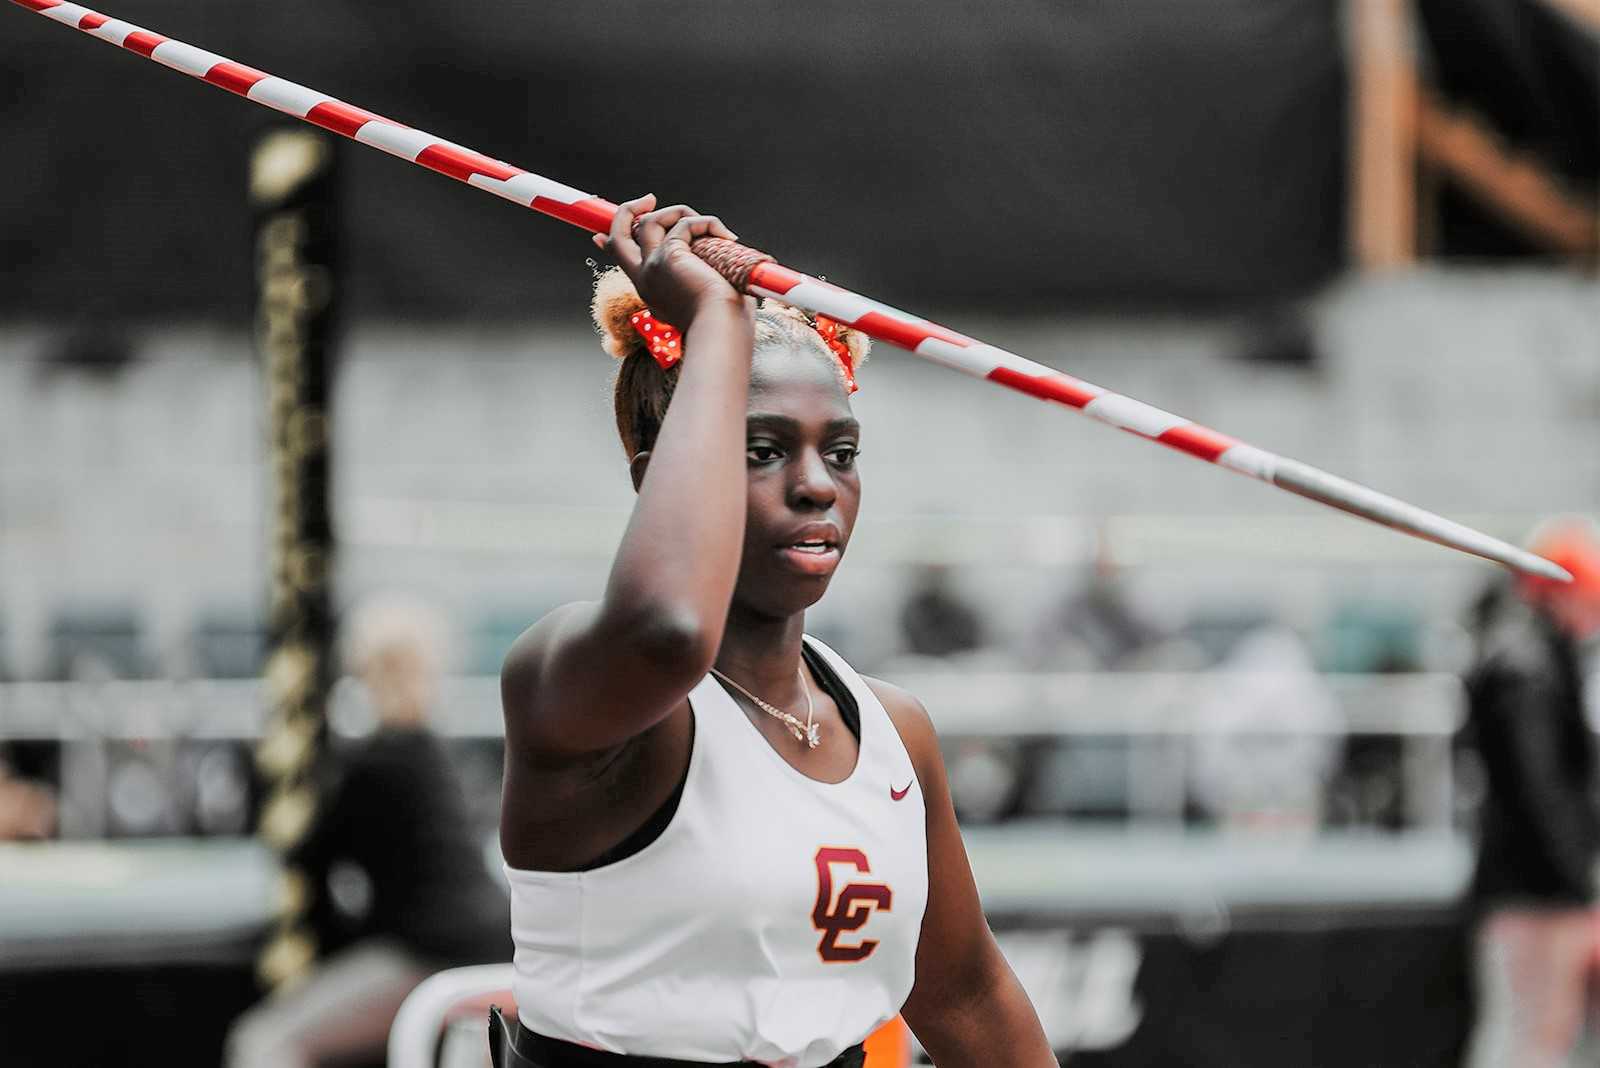 Kyeese Hollands won the javelin and was fifth in the discus in the 6A championships last year. (Photo by Fanta Mithmeuangneua)